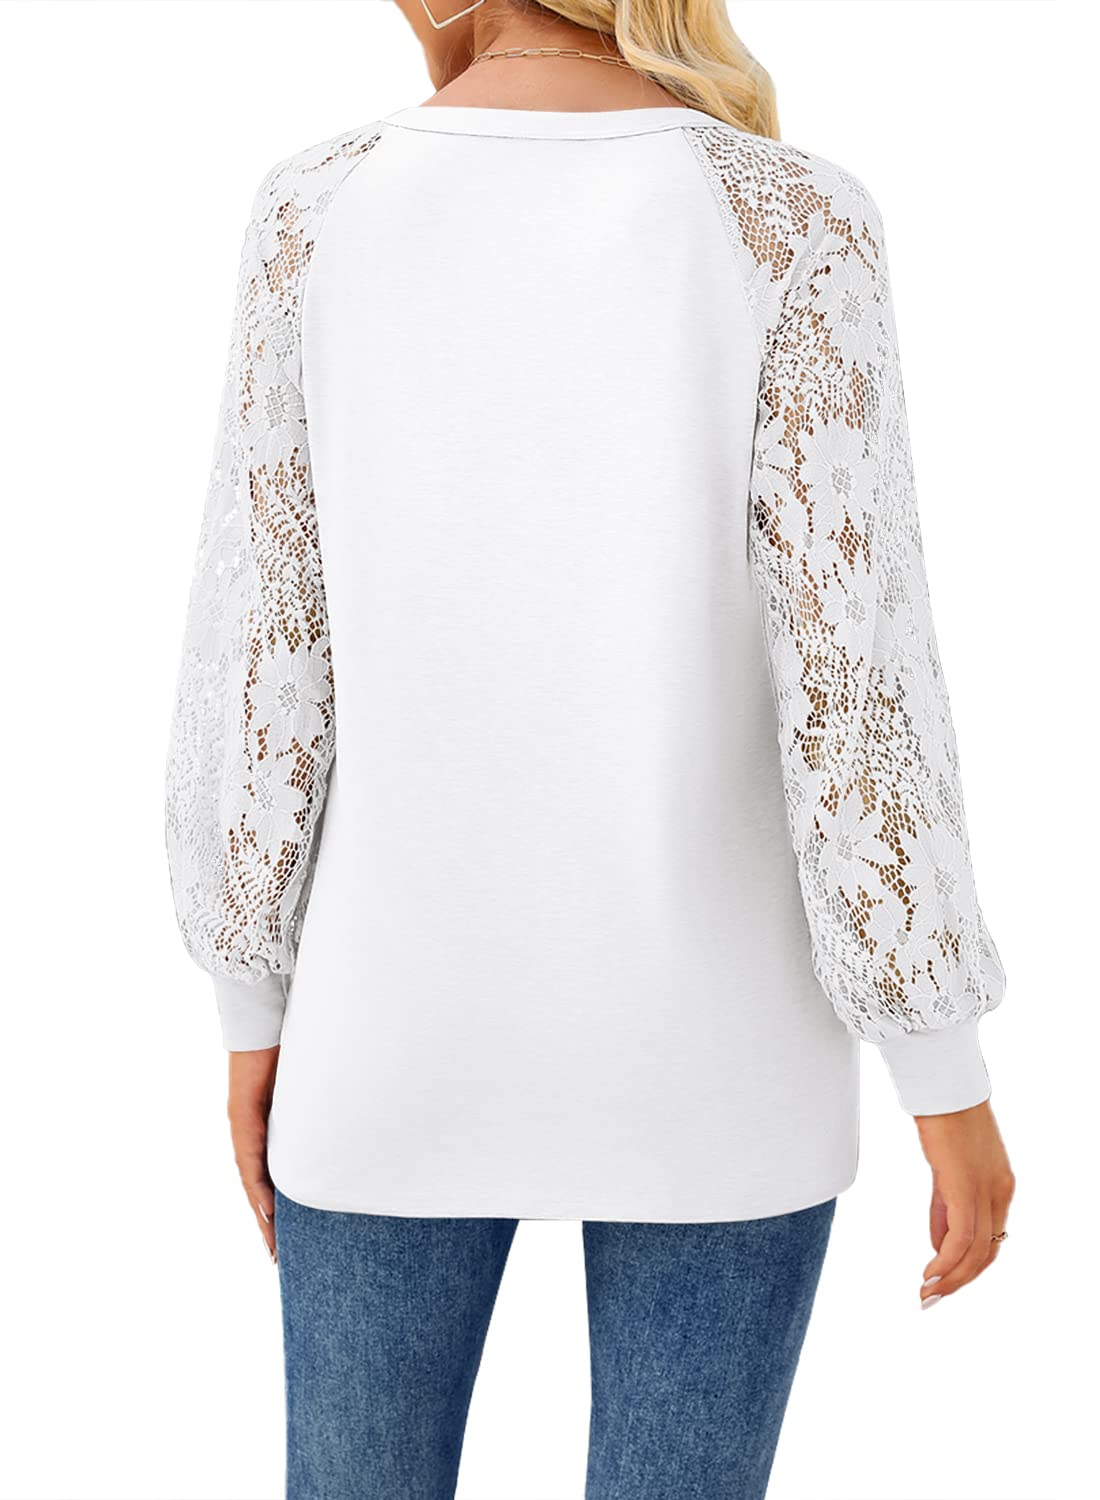 Women’s T-Shirts Long Sleeve Lace V Neck Button Loose T-Shirt - MsDressly